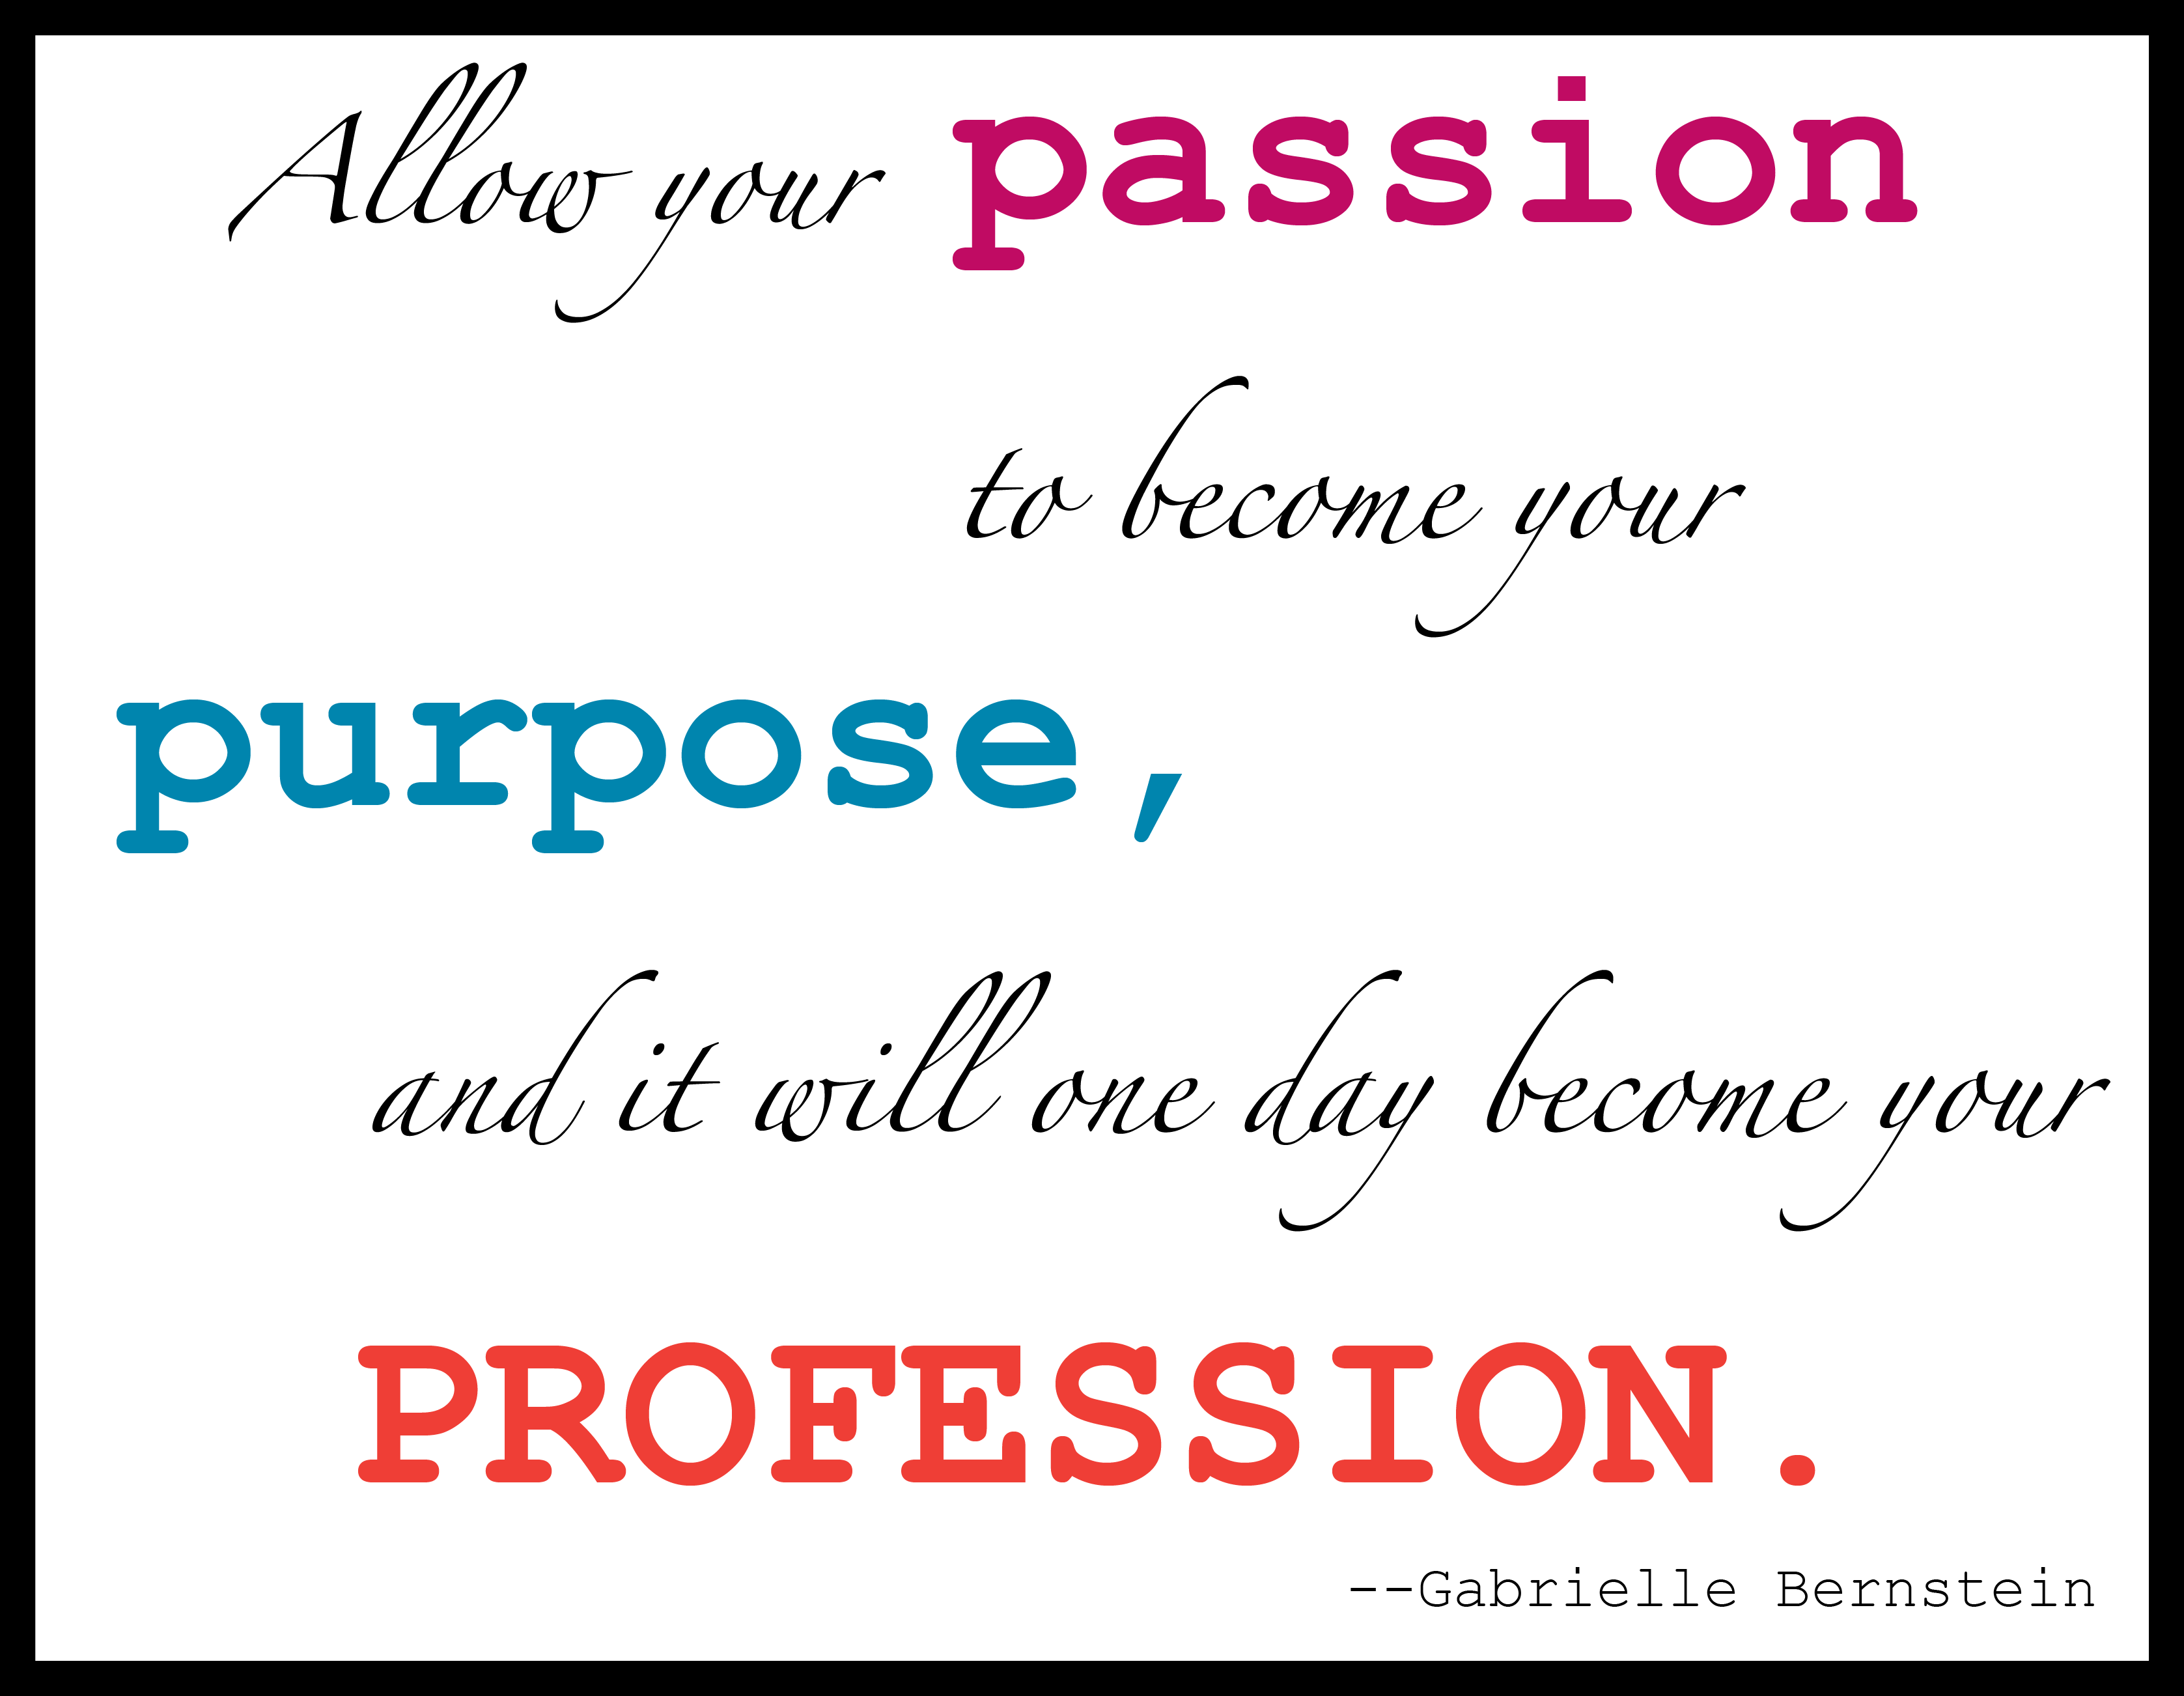 Allow your passion to become your purpose, and it will one day become your profession. Gabrielle Bernstein